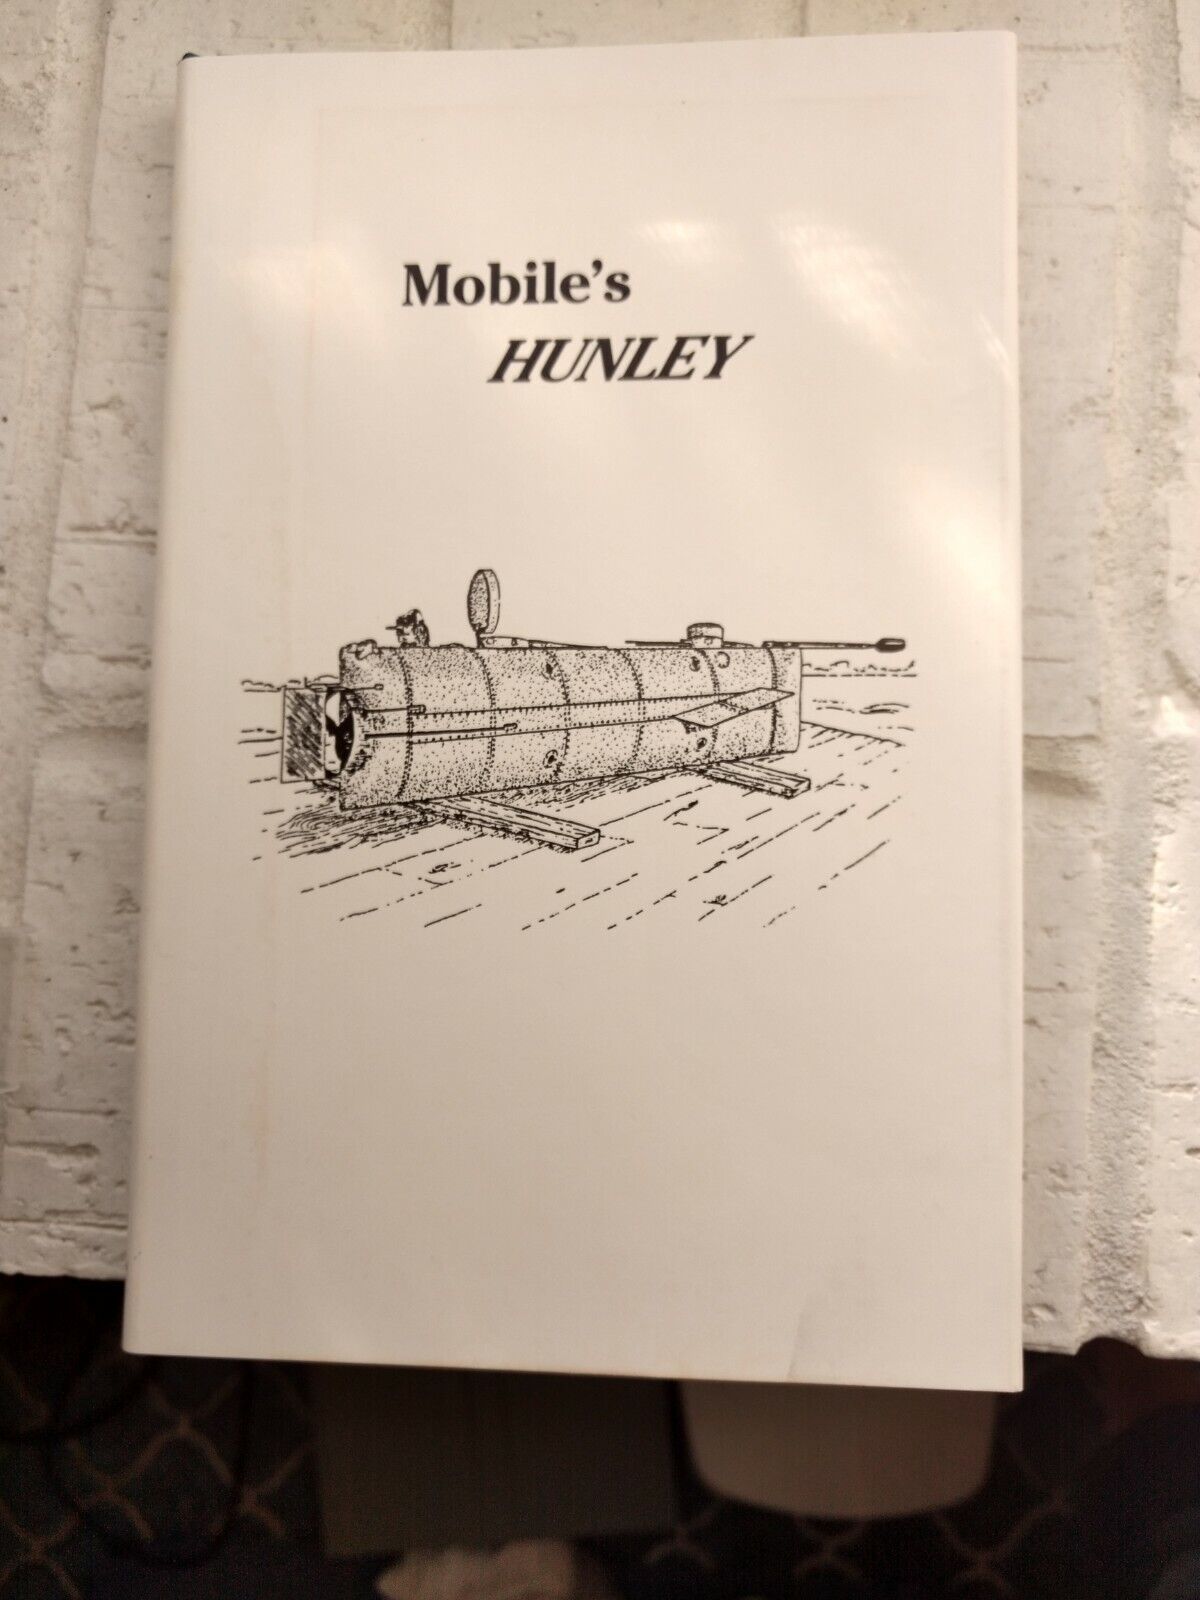 Mobile's Hunley (the Confederate submarine)